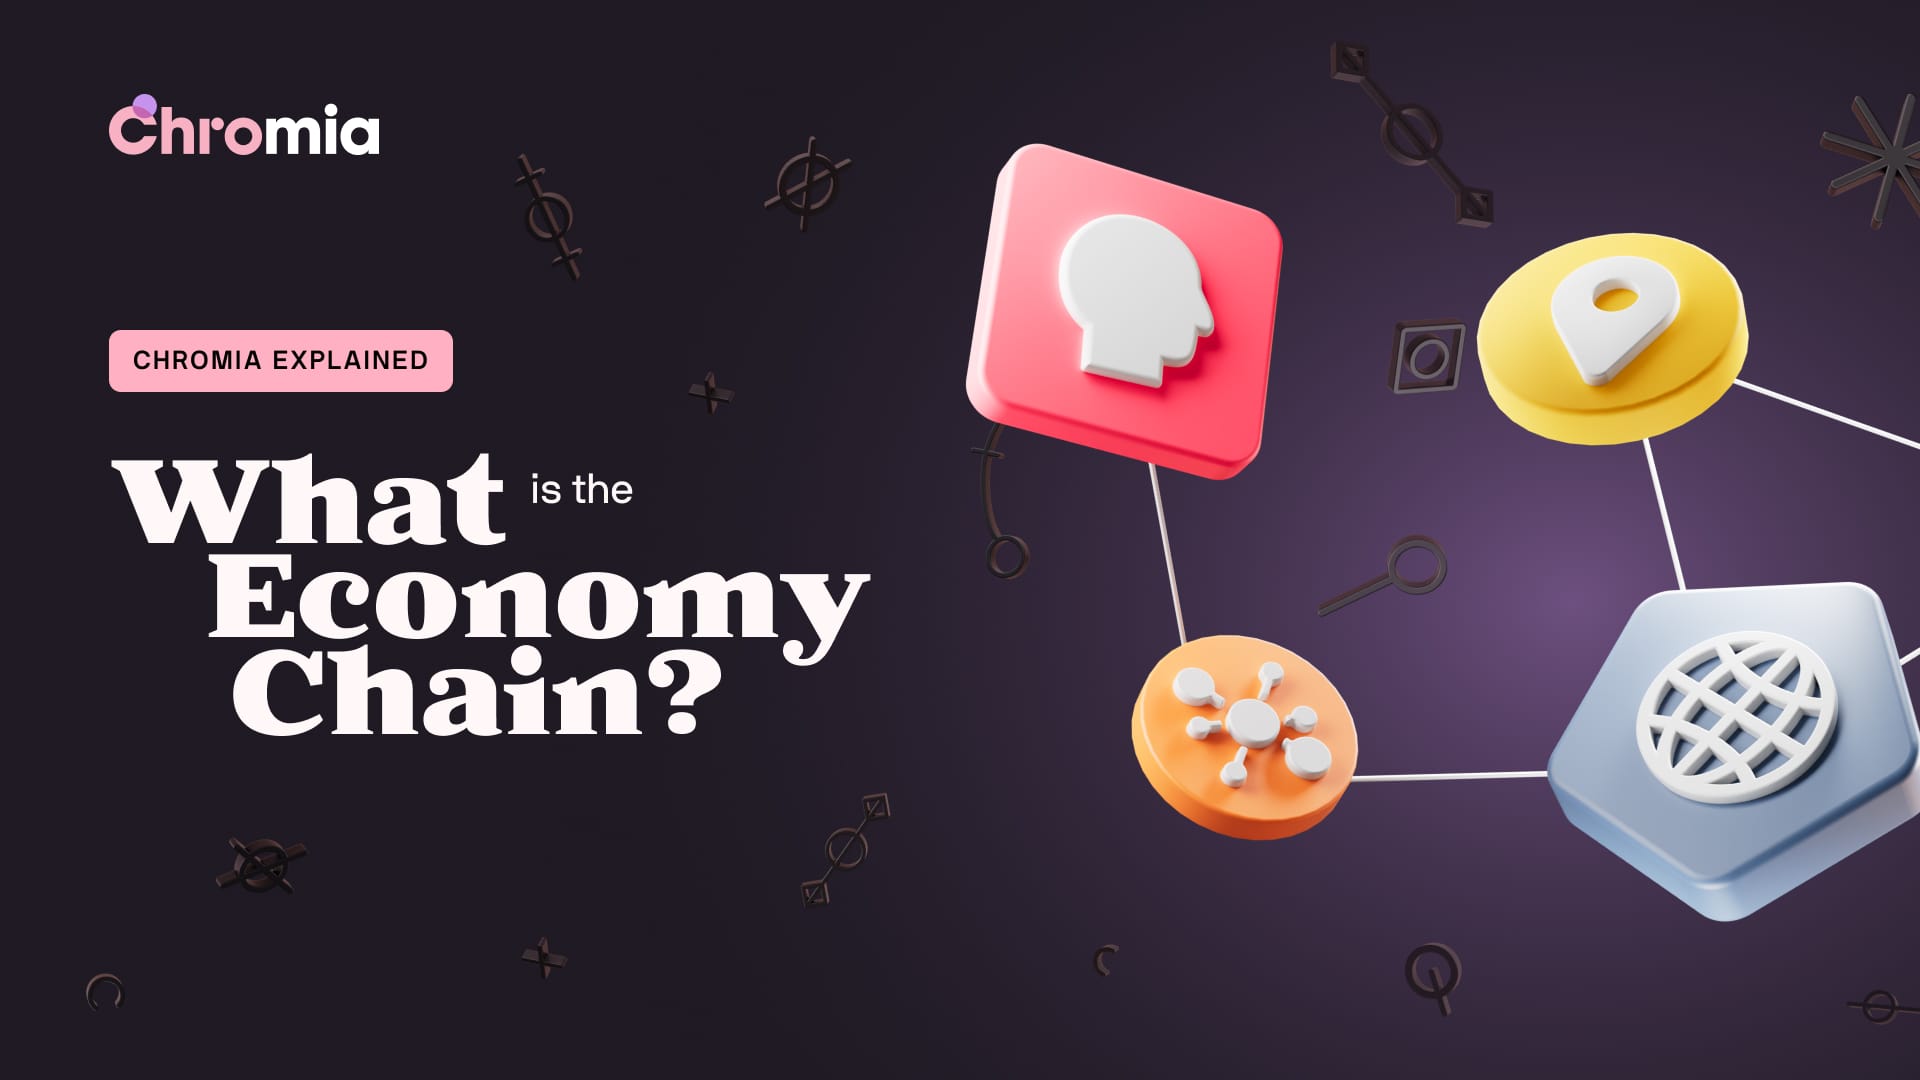 Chromia Explained: What is the Economy Chain?